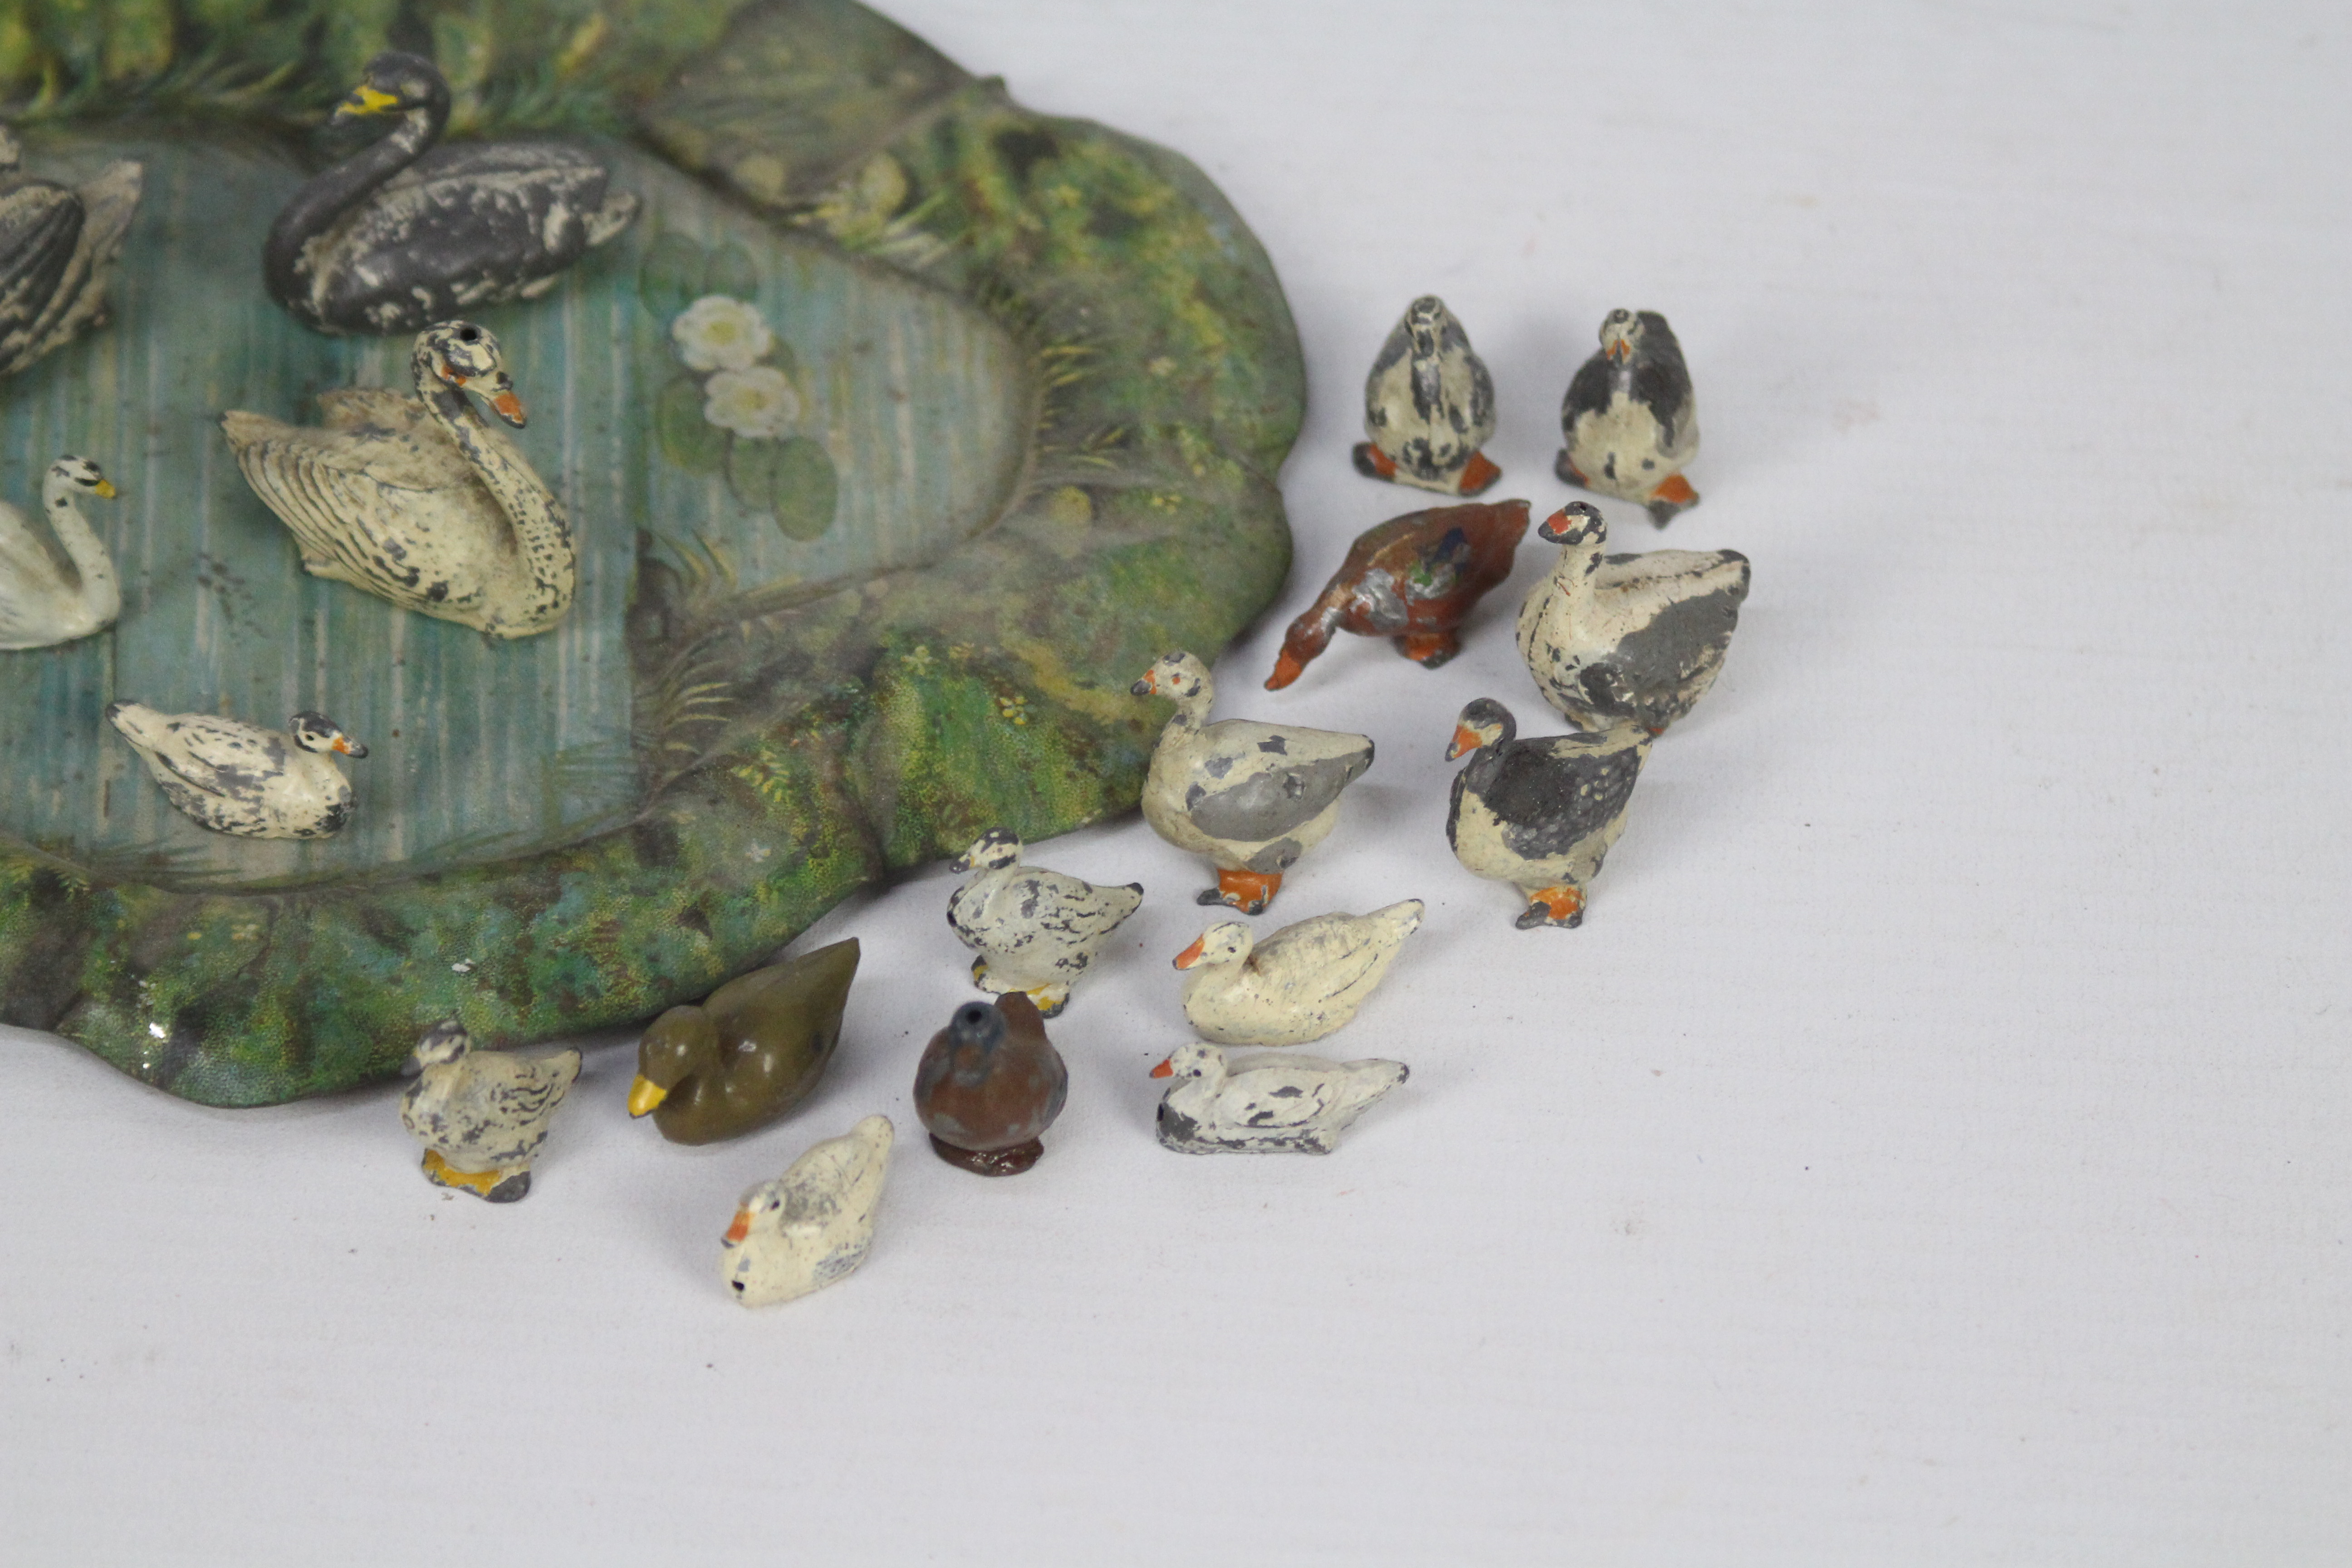 Britains - A vintage Britains #635 tin pond, with a group of 4 Britains swans, - Image 3 of 4